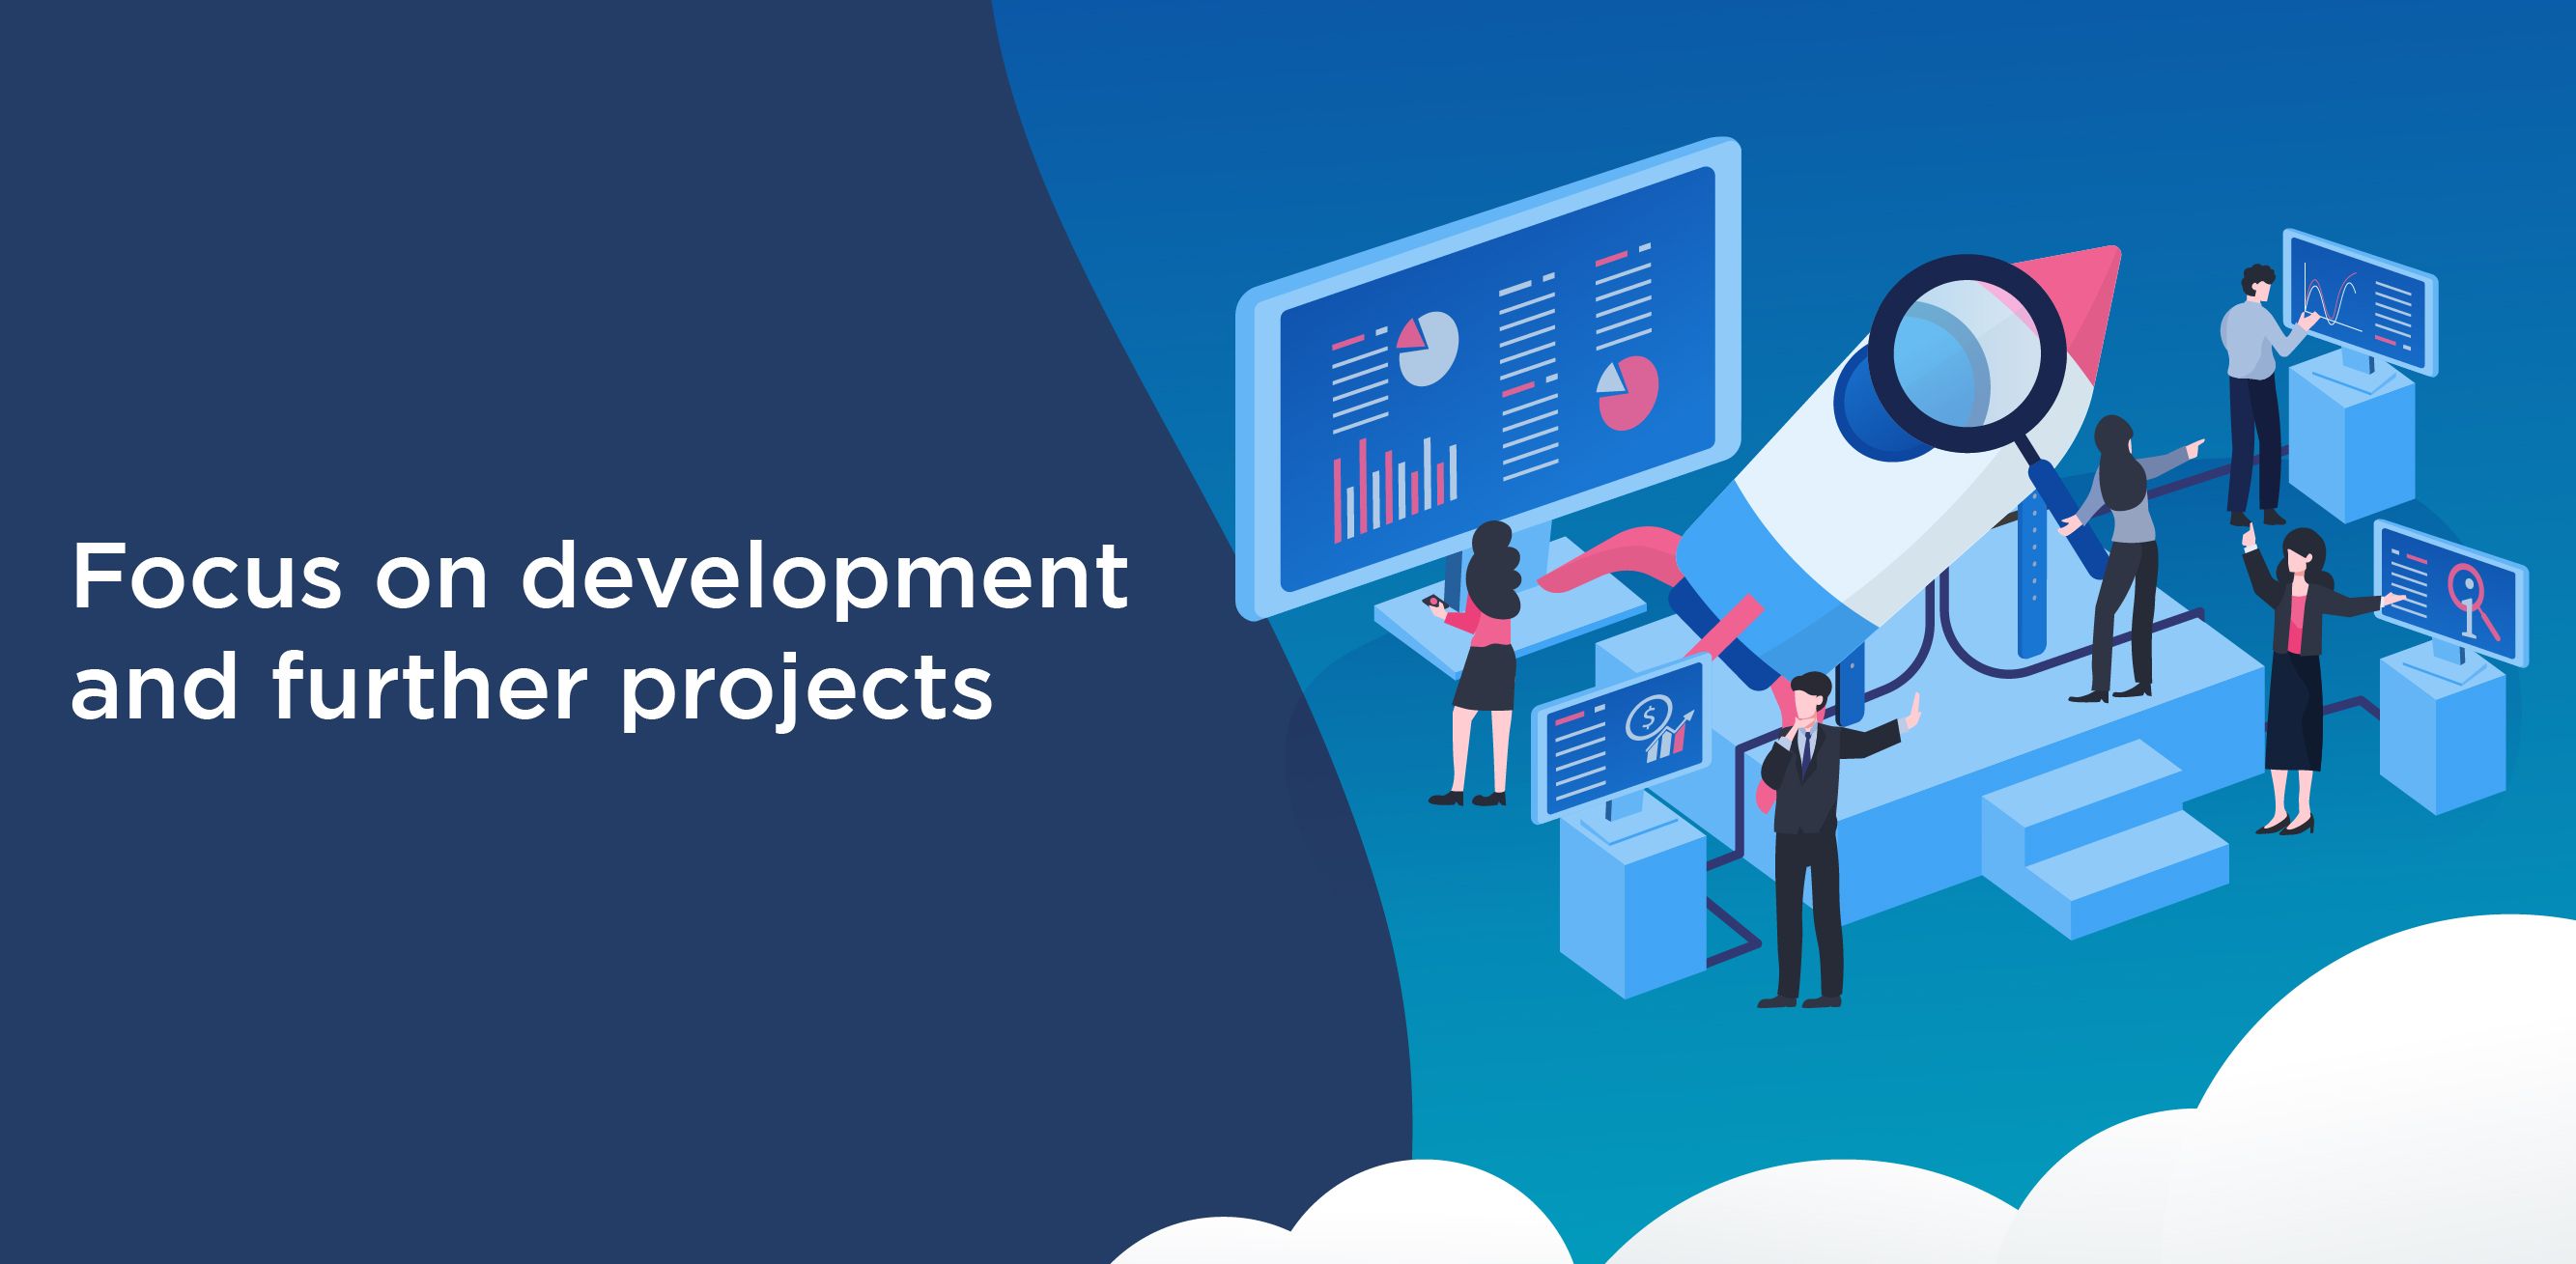 Focus on development and further projects